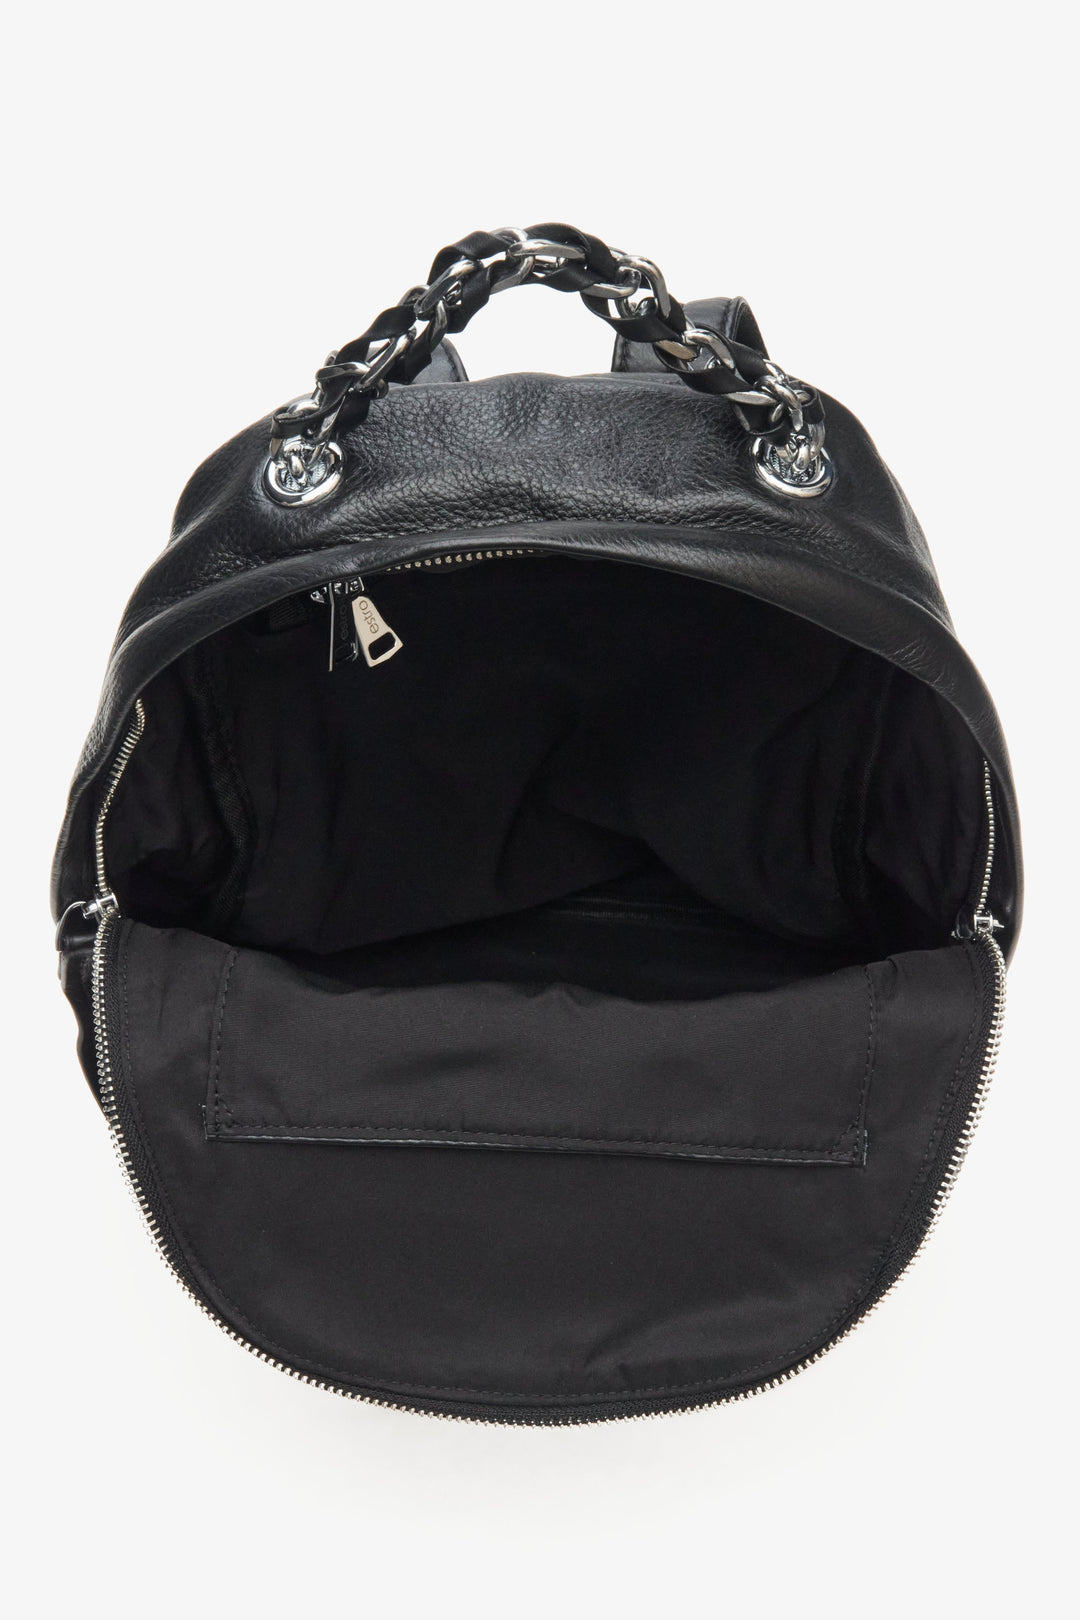 Women's black backpack made of genuine leather by Estro - close-up of the interior.